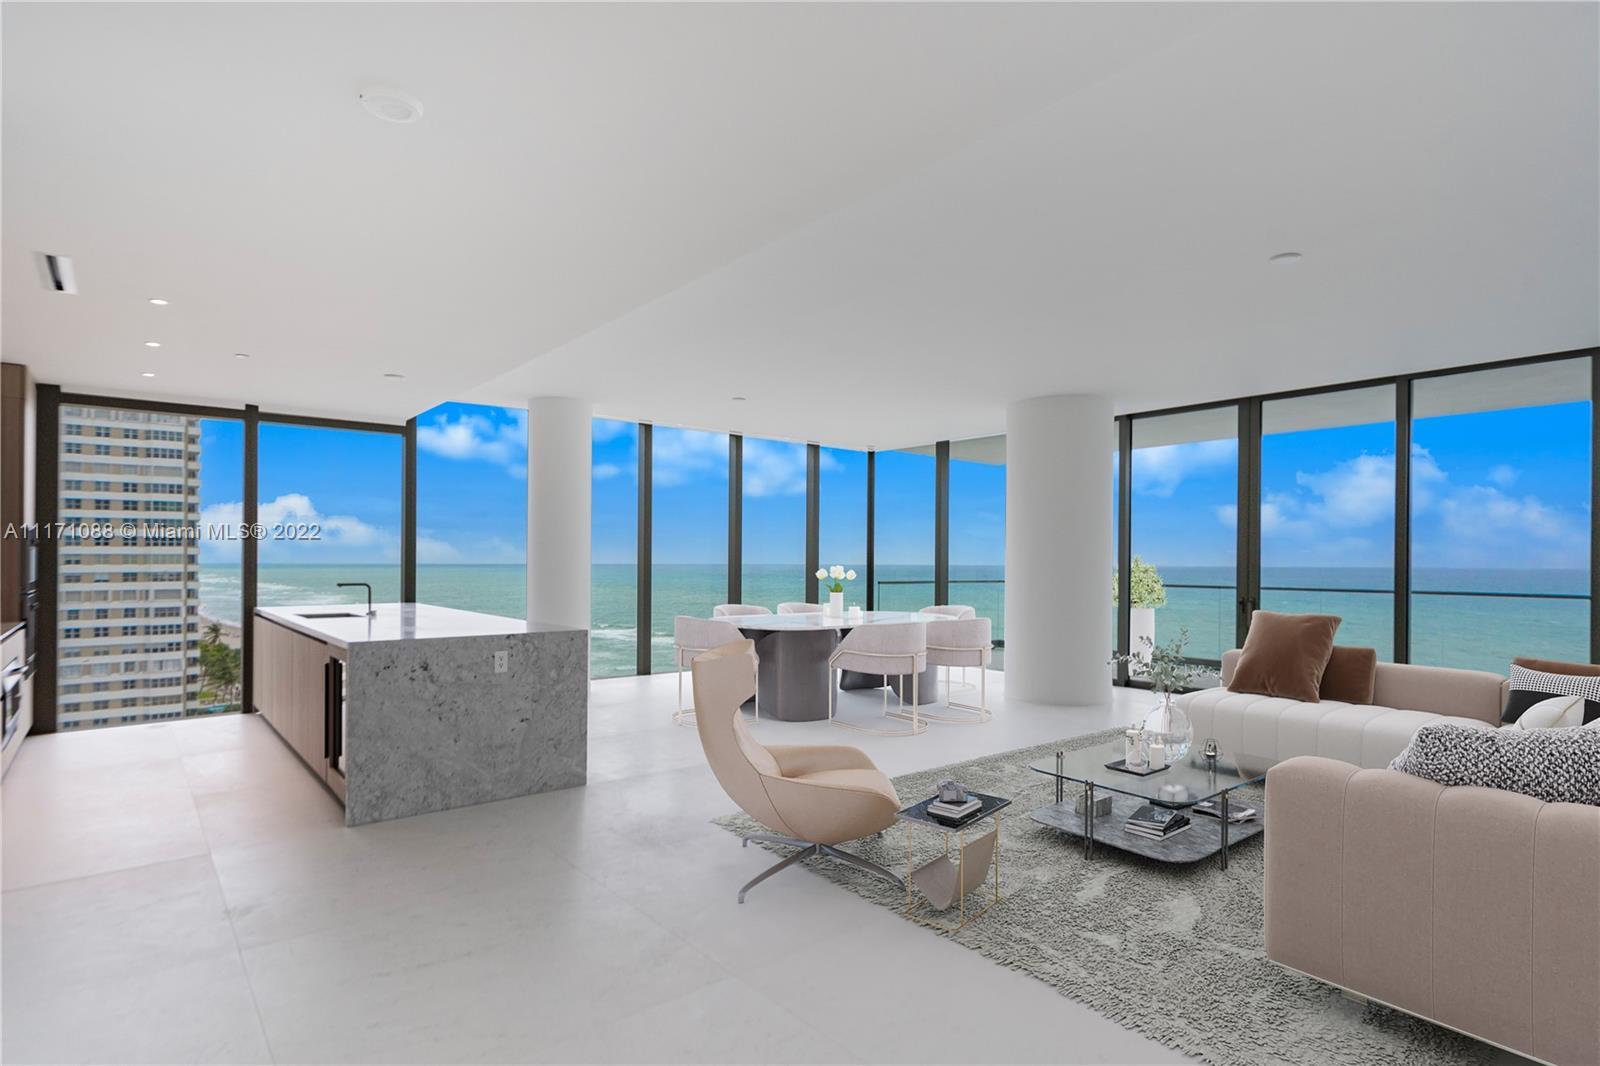 Enter this residence and be wowed by the 10' ceilings, wrap around glass & wide direct ocean views. 